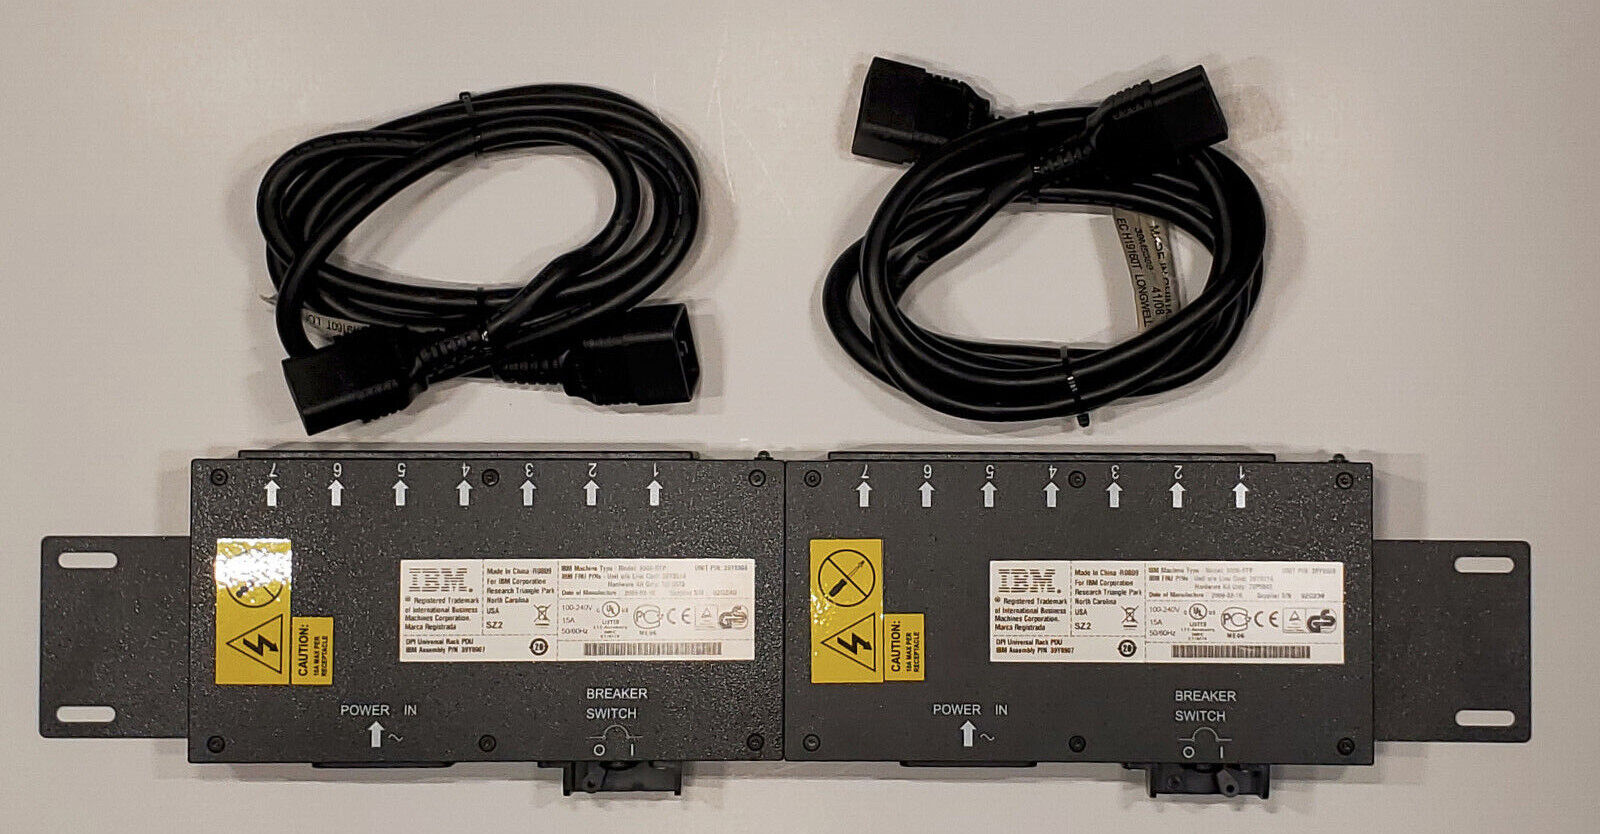 2x IBM 9306-RTP Rack Mount PDU 39Y8907 with Extension Cords